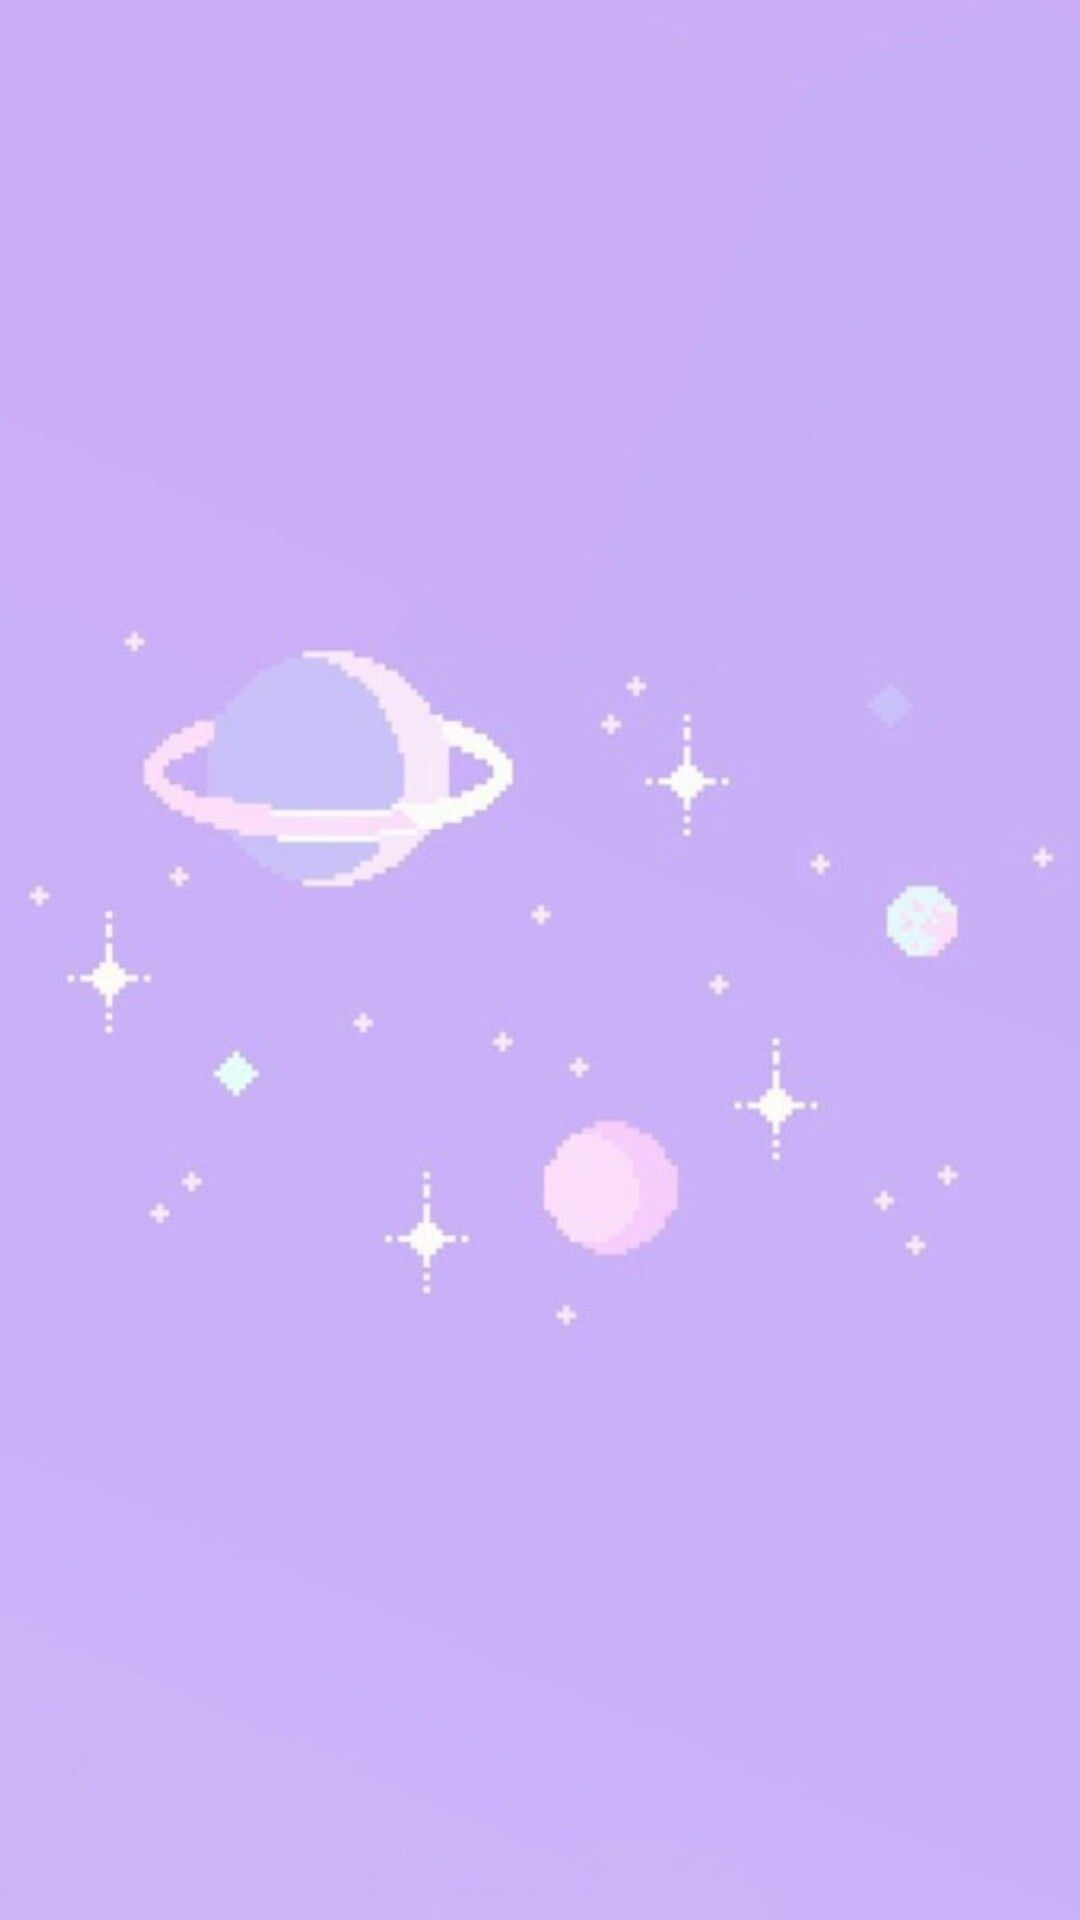 Pastel Kawaii Wallpapers Pastel Kawaii Purple Aesthetic Free For Commercial Use High Quality